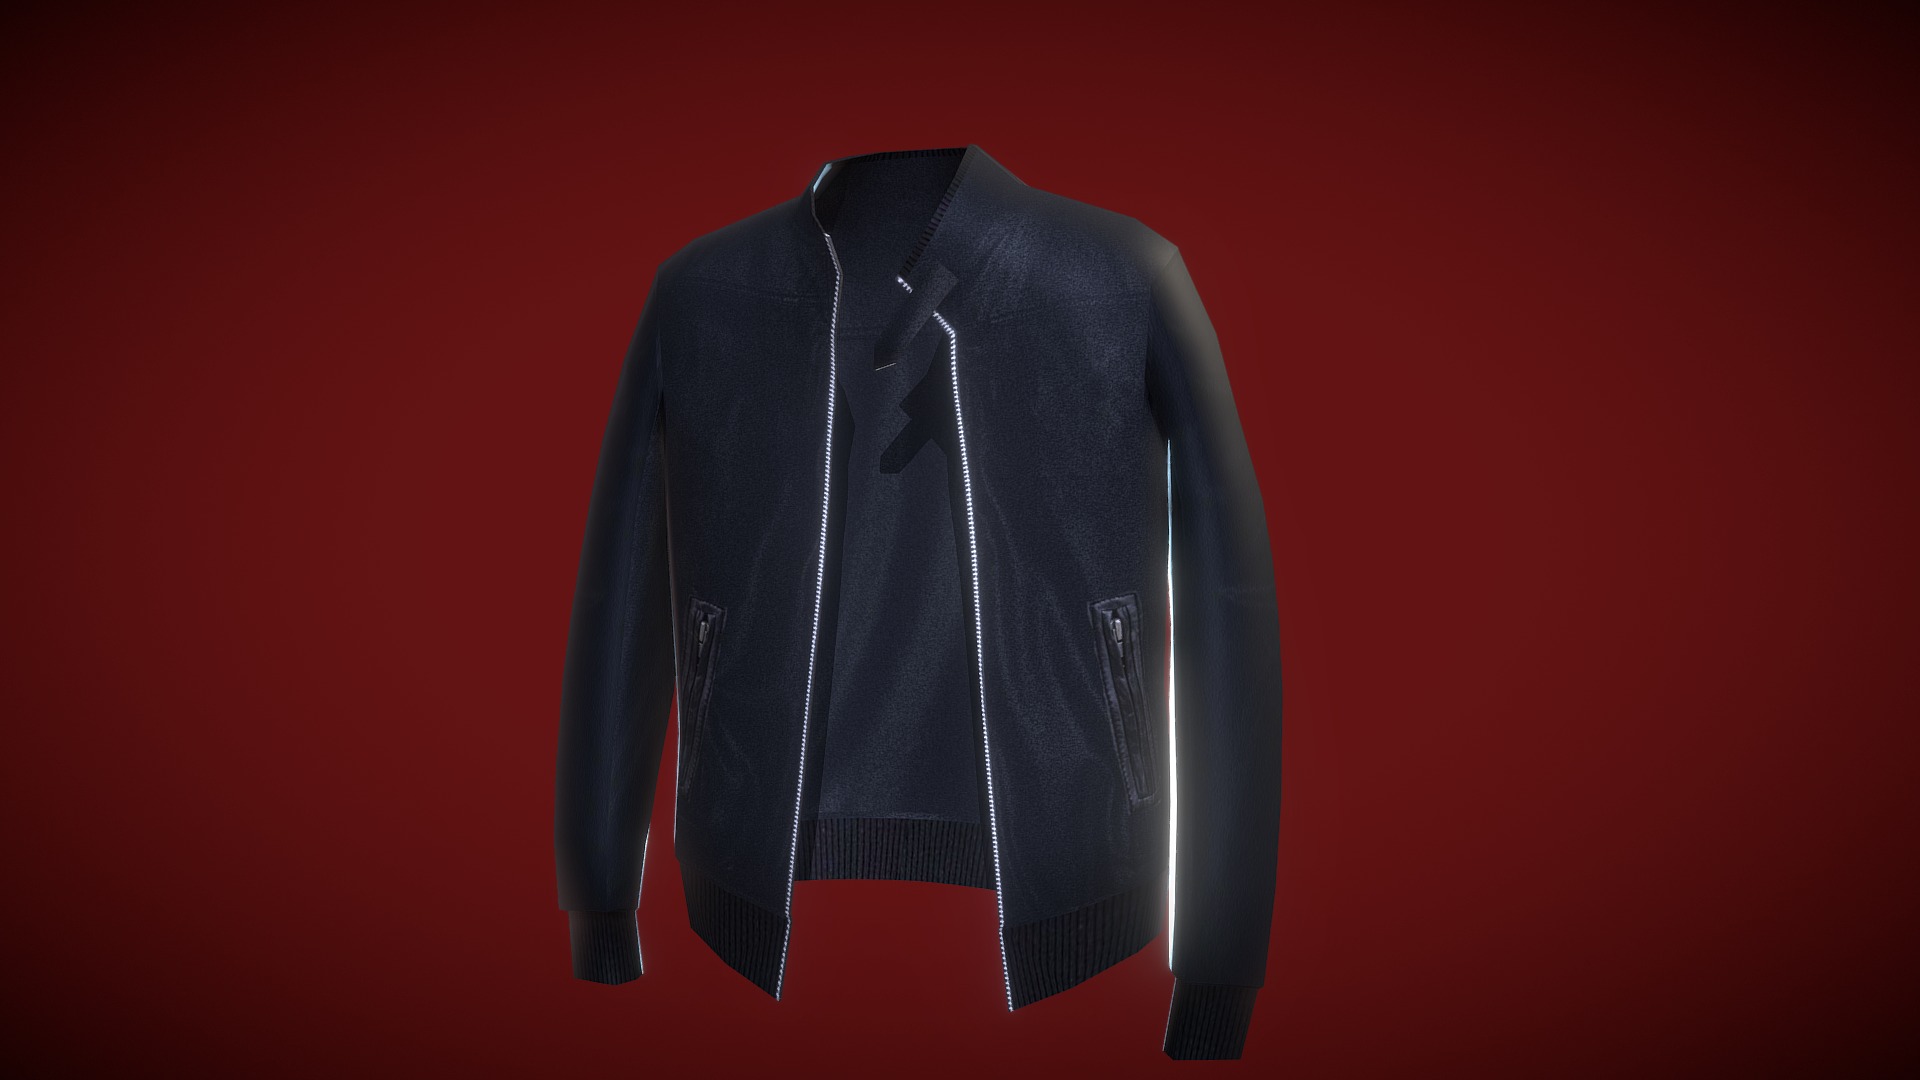 3D model Zara Jacket - This is a 3D model of the Zara Jacket. The 3D model is about a black jacket on a red background.